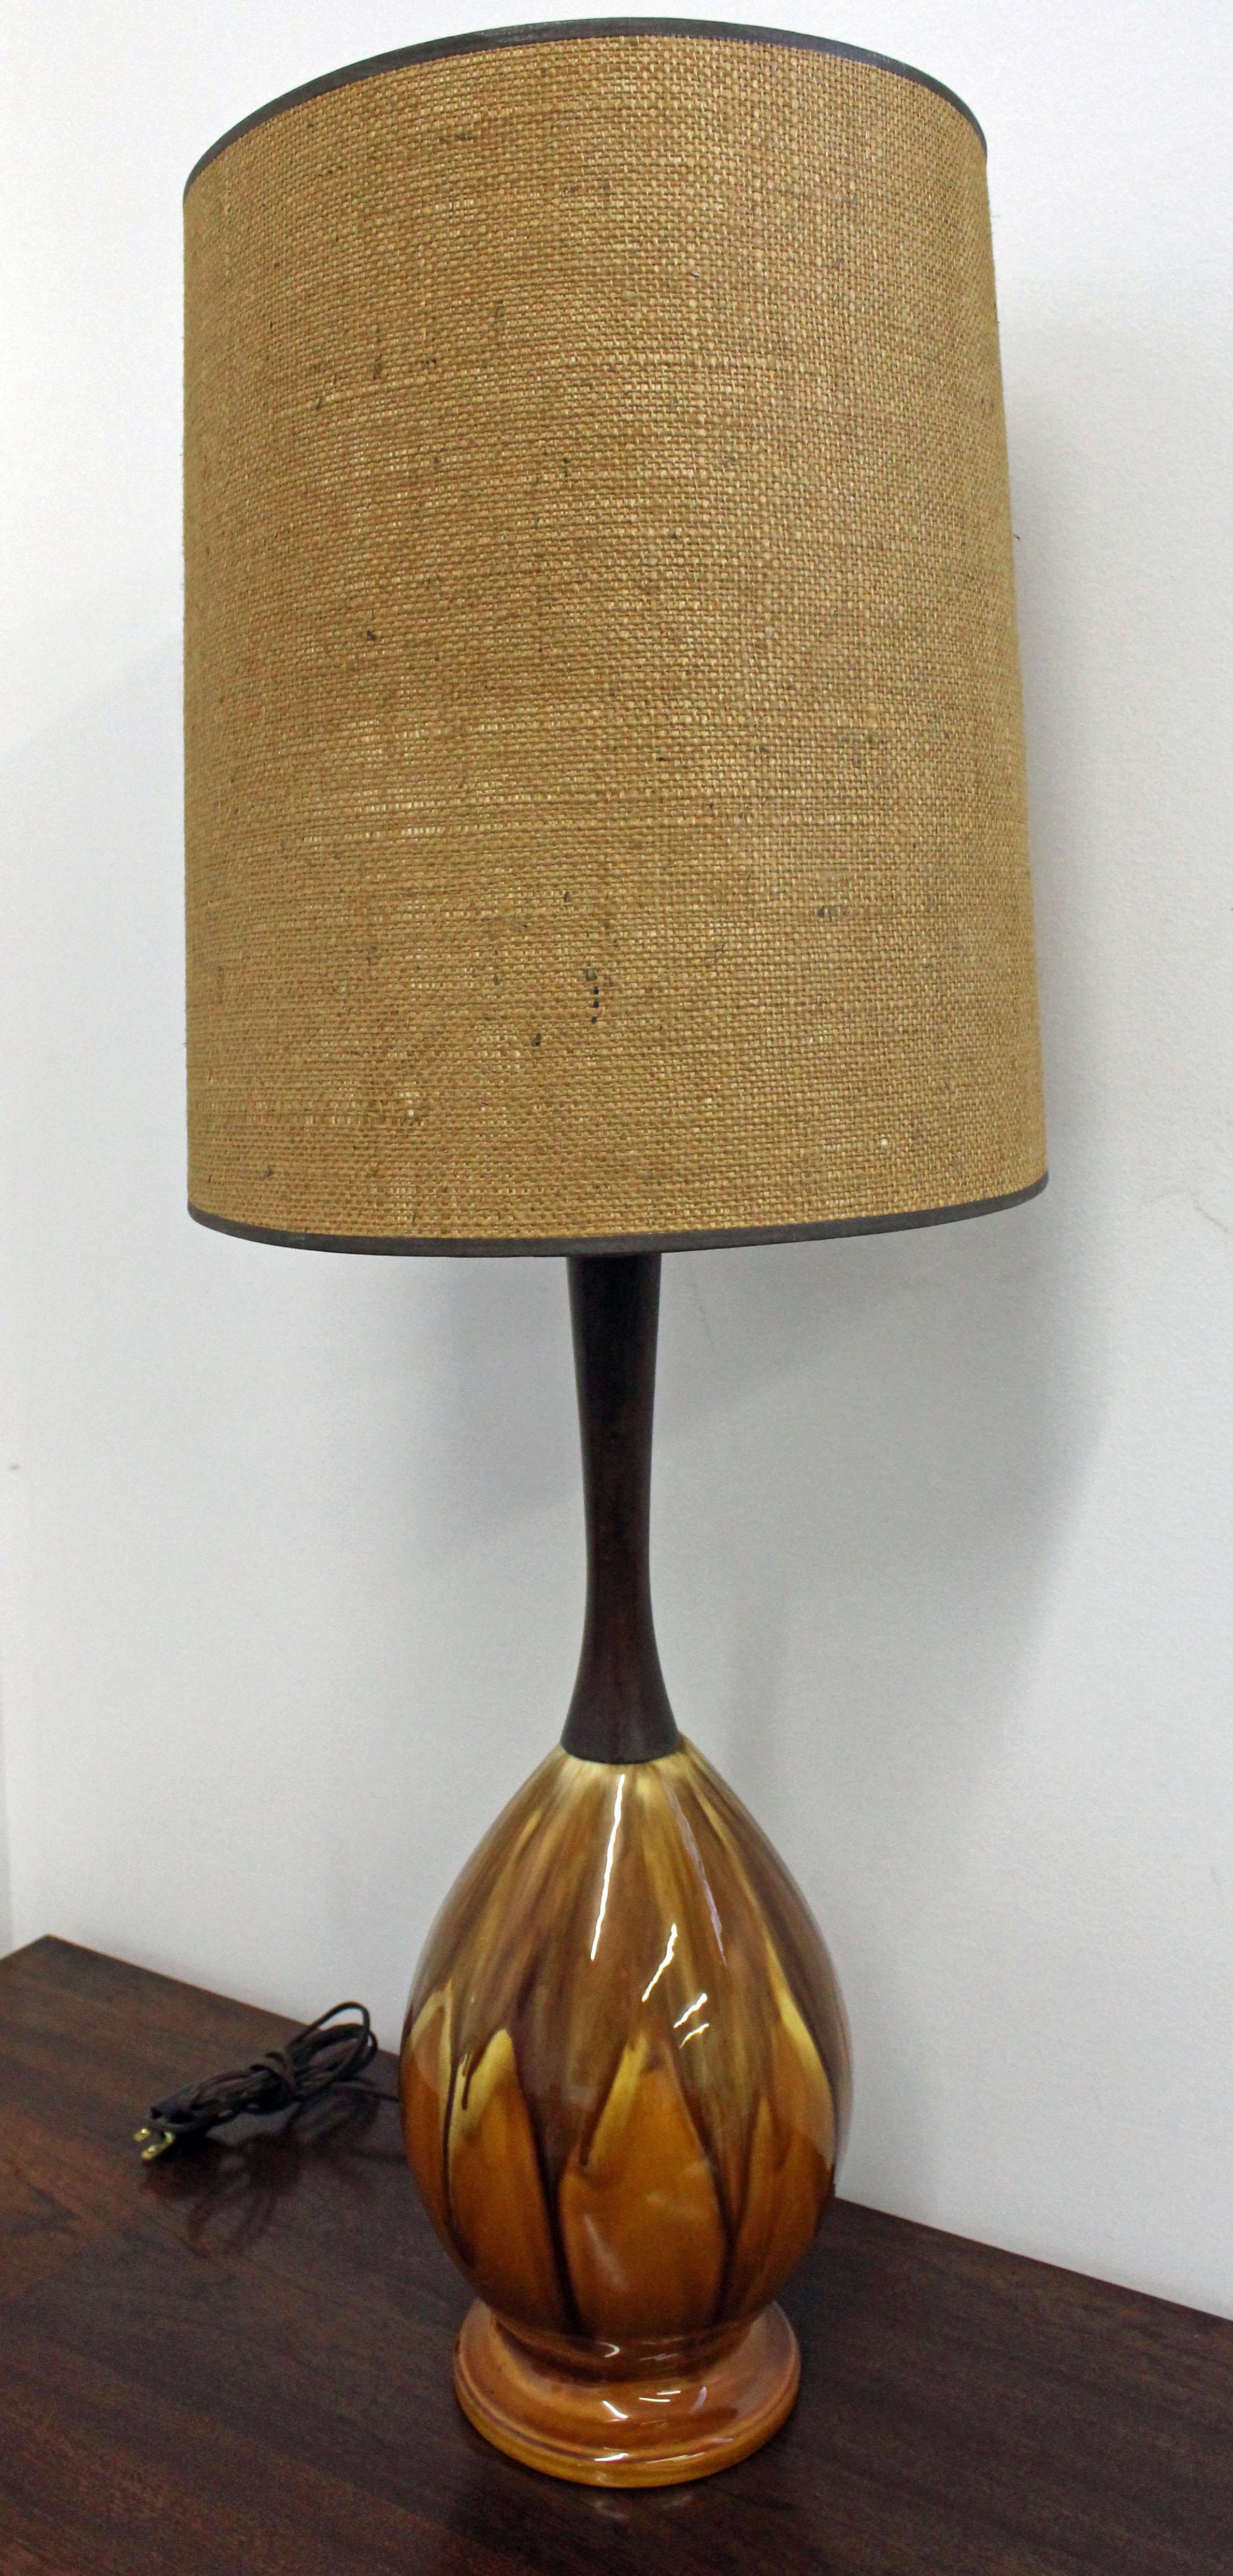 Offered is a retro vintage ceramic drip-glazed and walnut table lamp. The lamp shade shown is not included (display purposes only). It is in good, working condition, shows minor age wear (light surface scratches on wood, lighting works-see